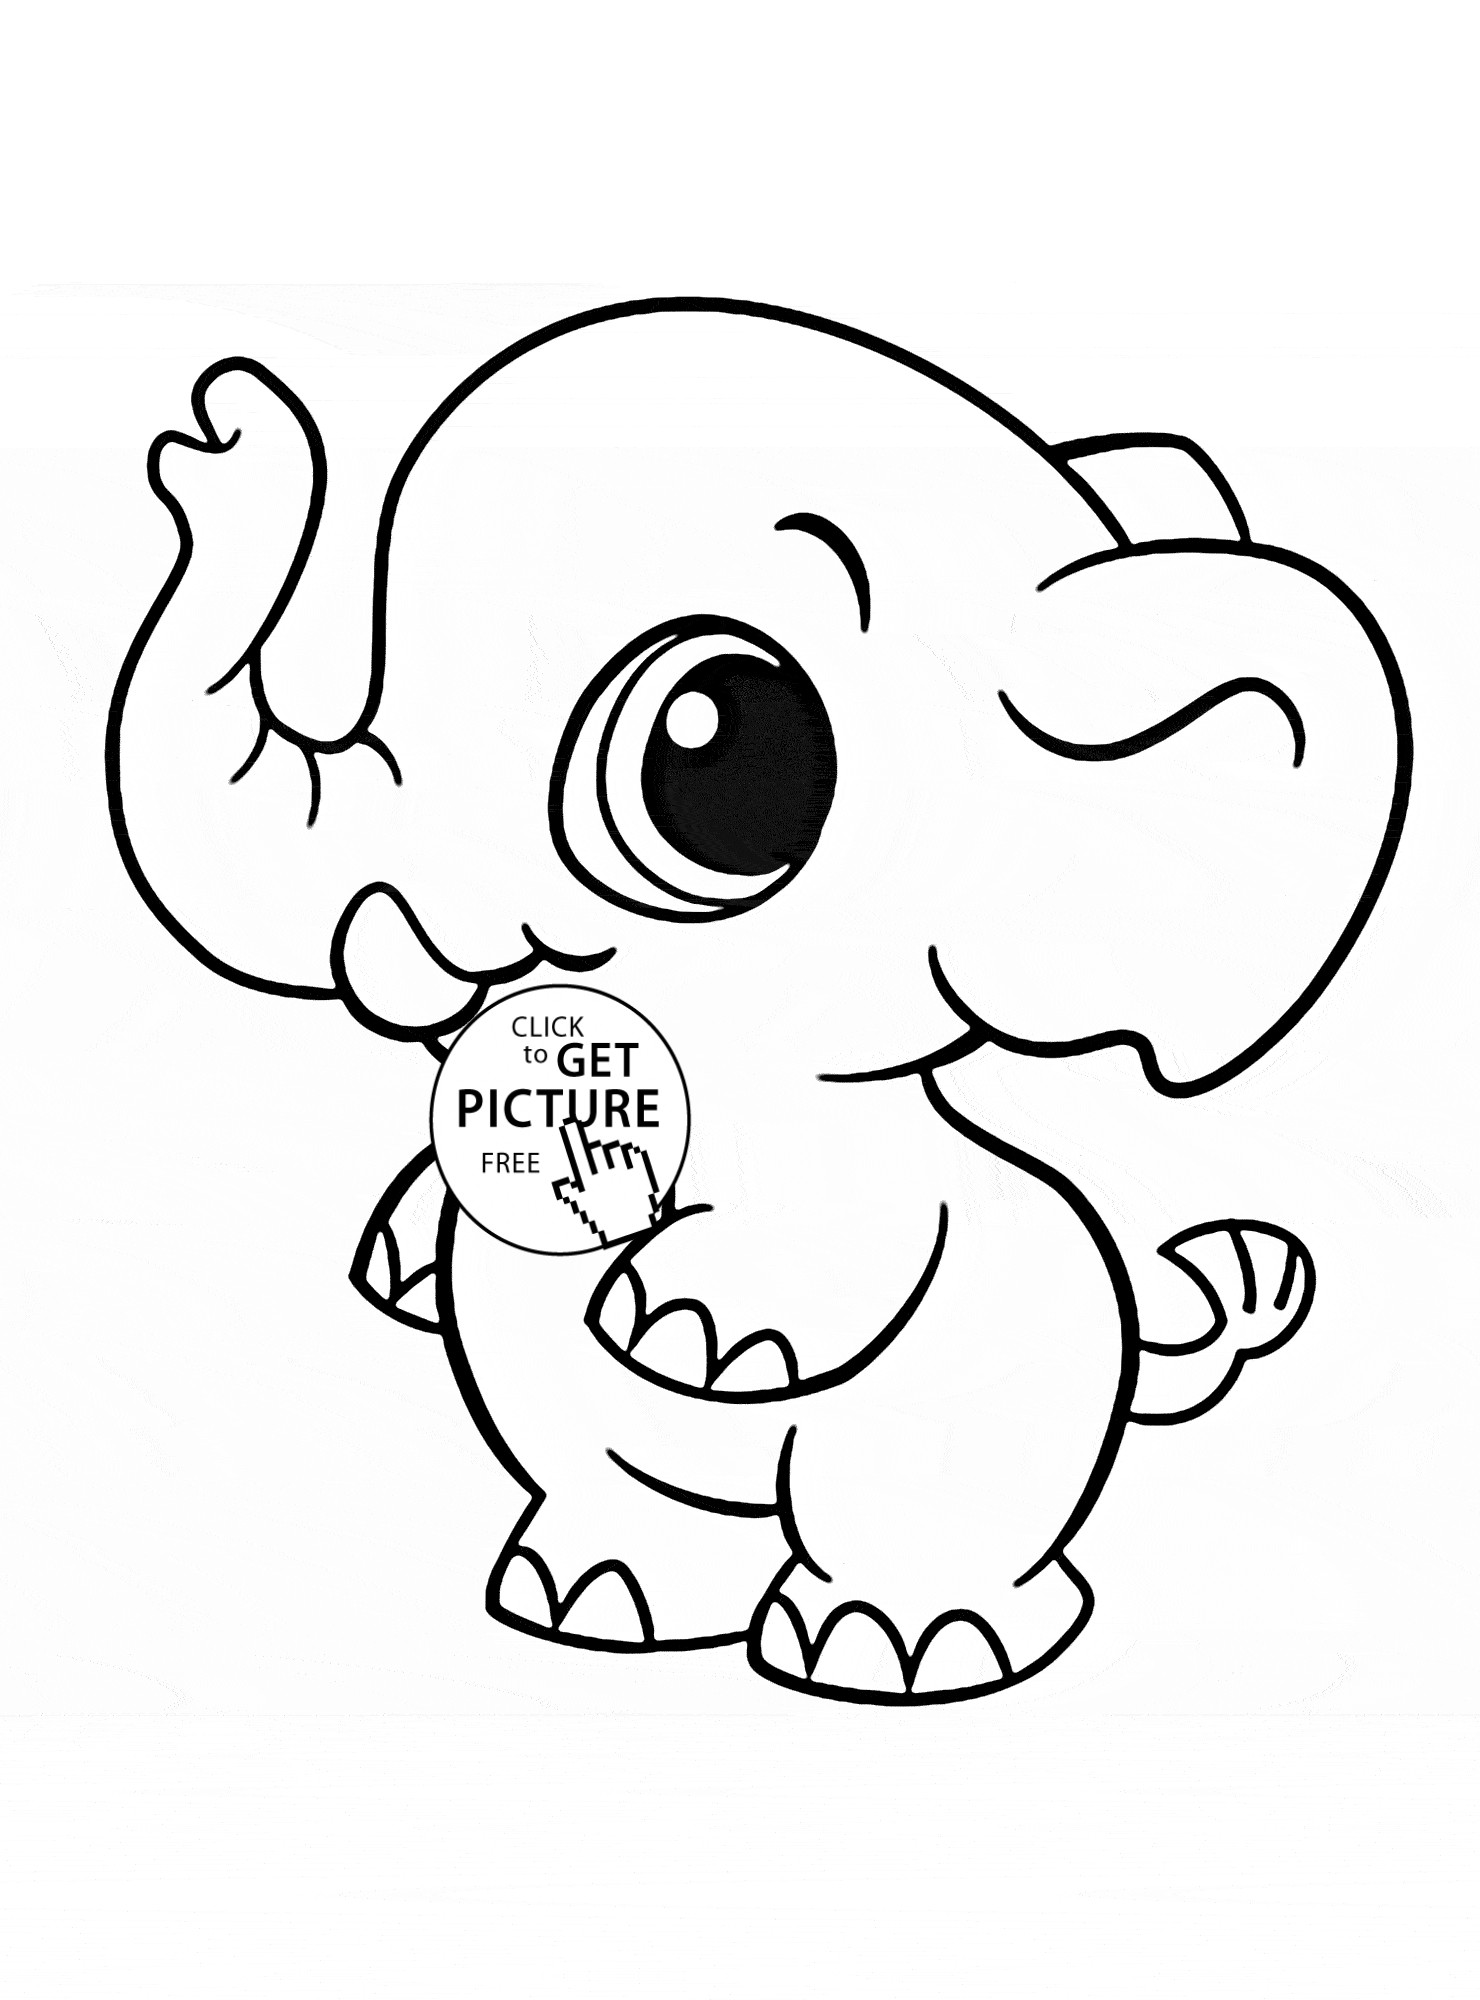 Cute Animals with Big Eyes Coloring Pages   BubaKids.com